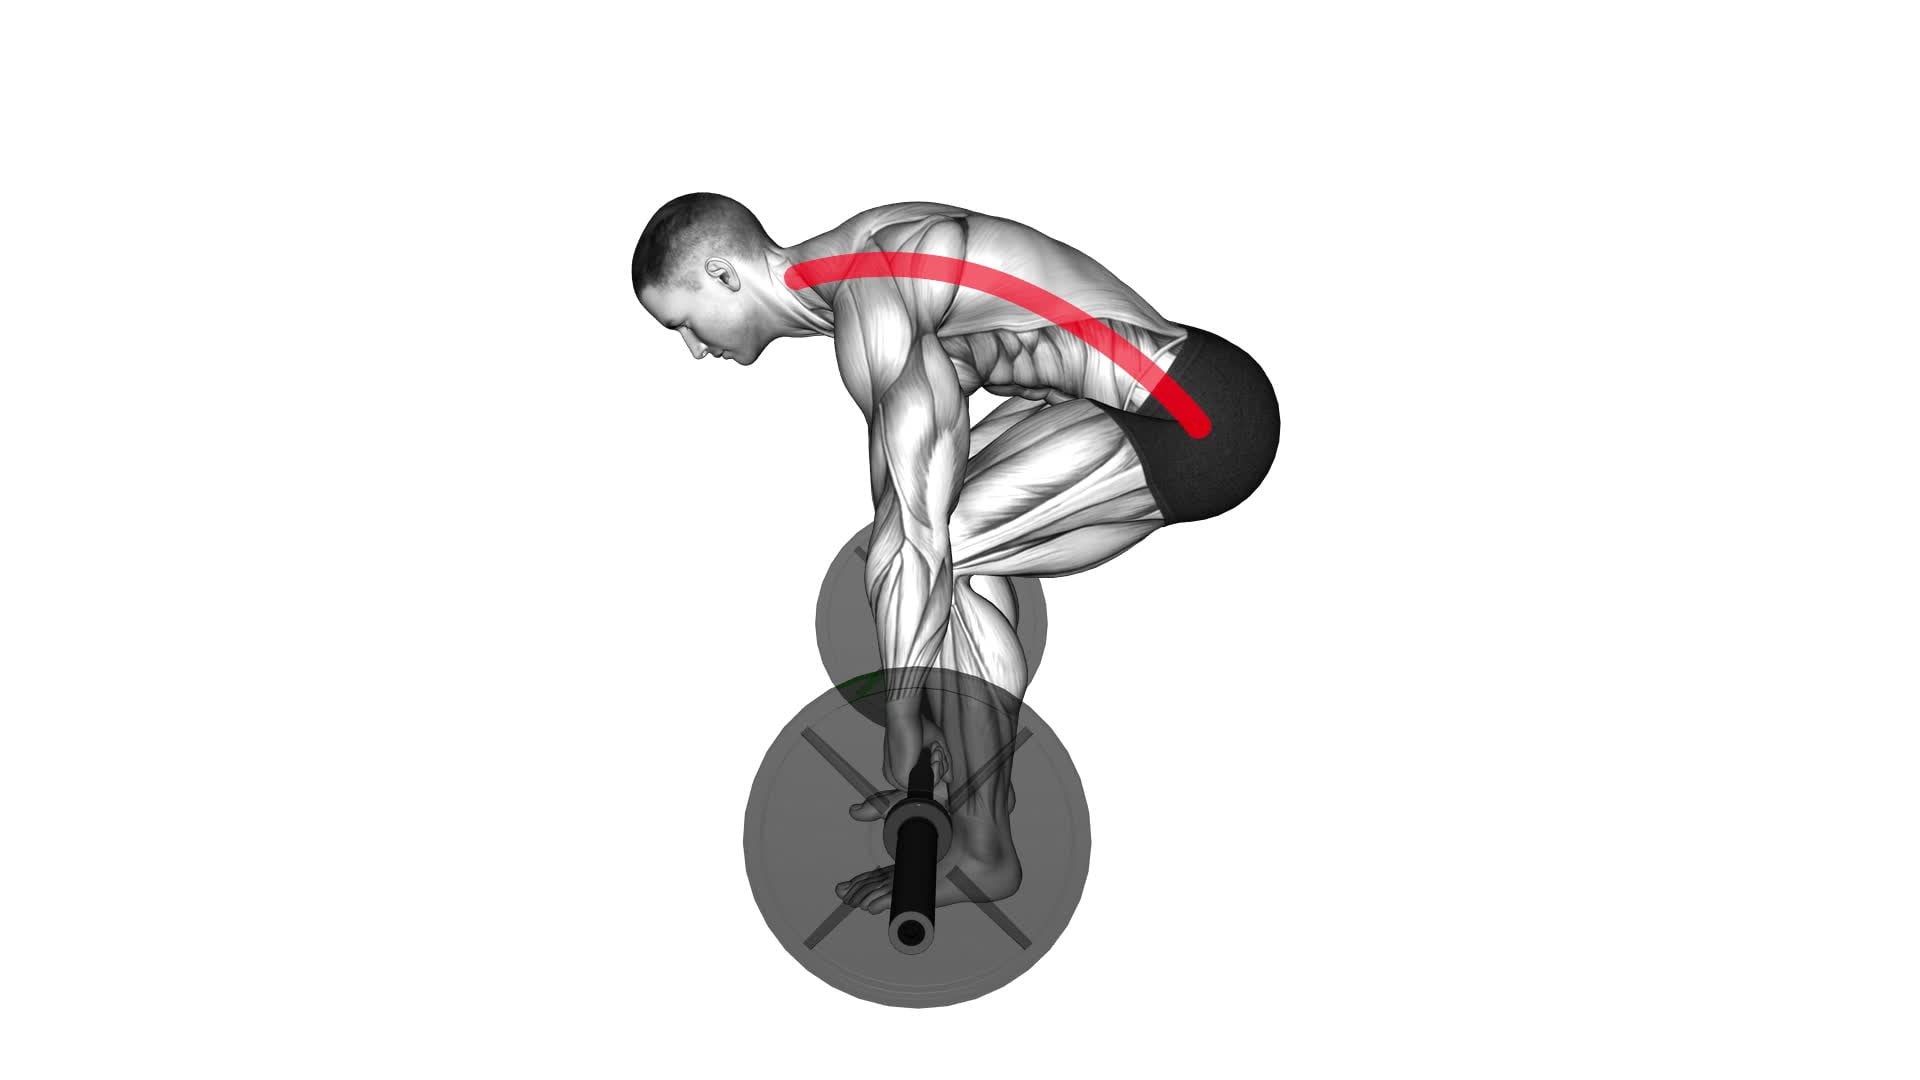 Deadlift - Back (WRONG RIGHT) - Video Exercise Guide & Tips